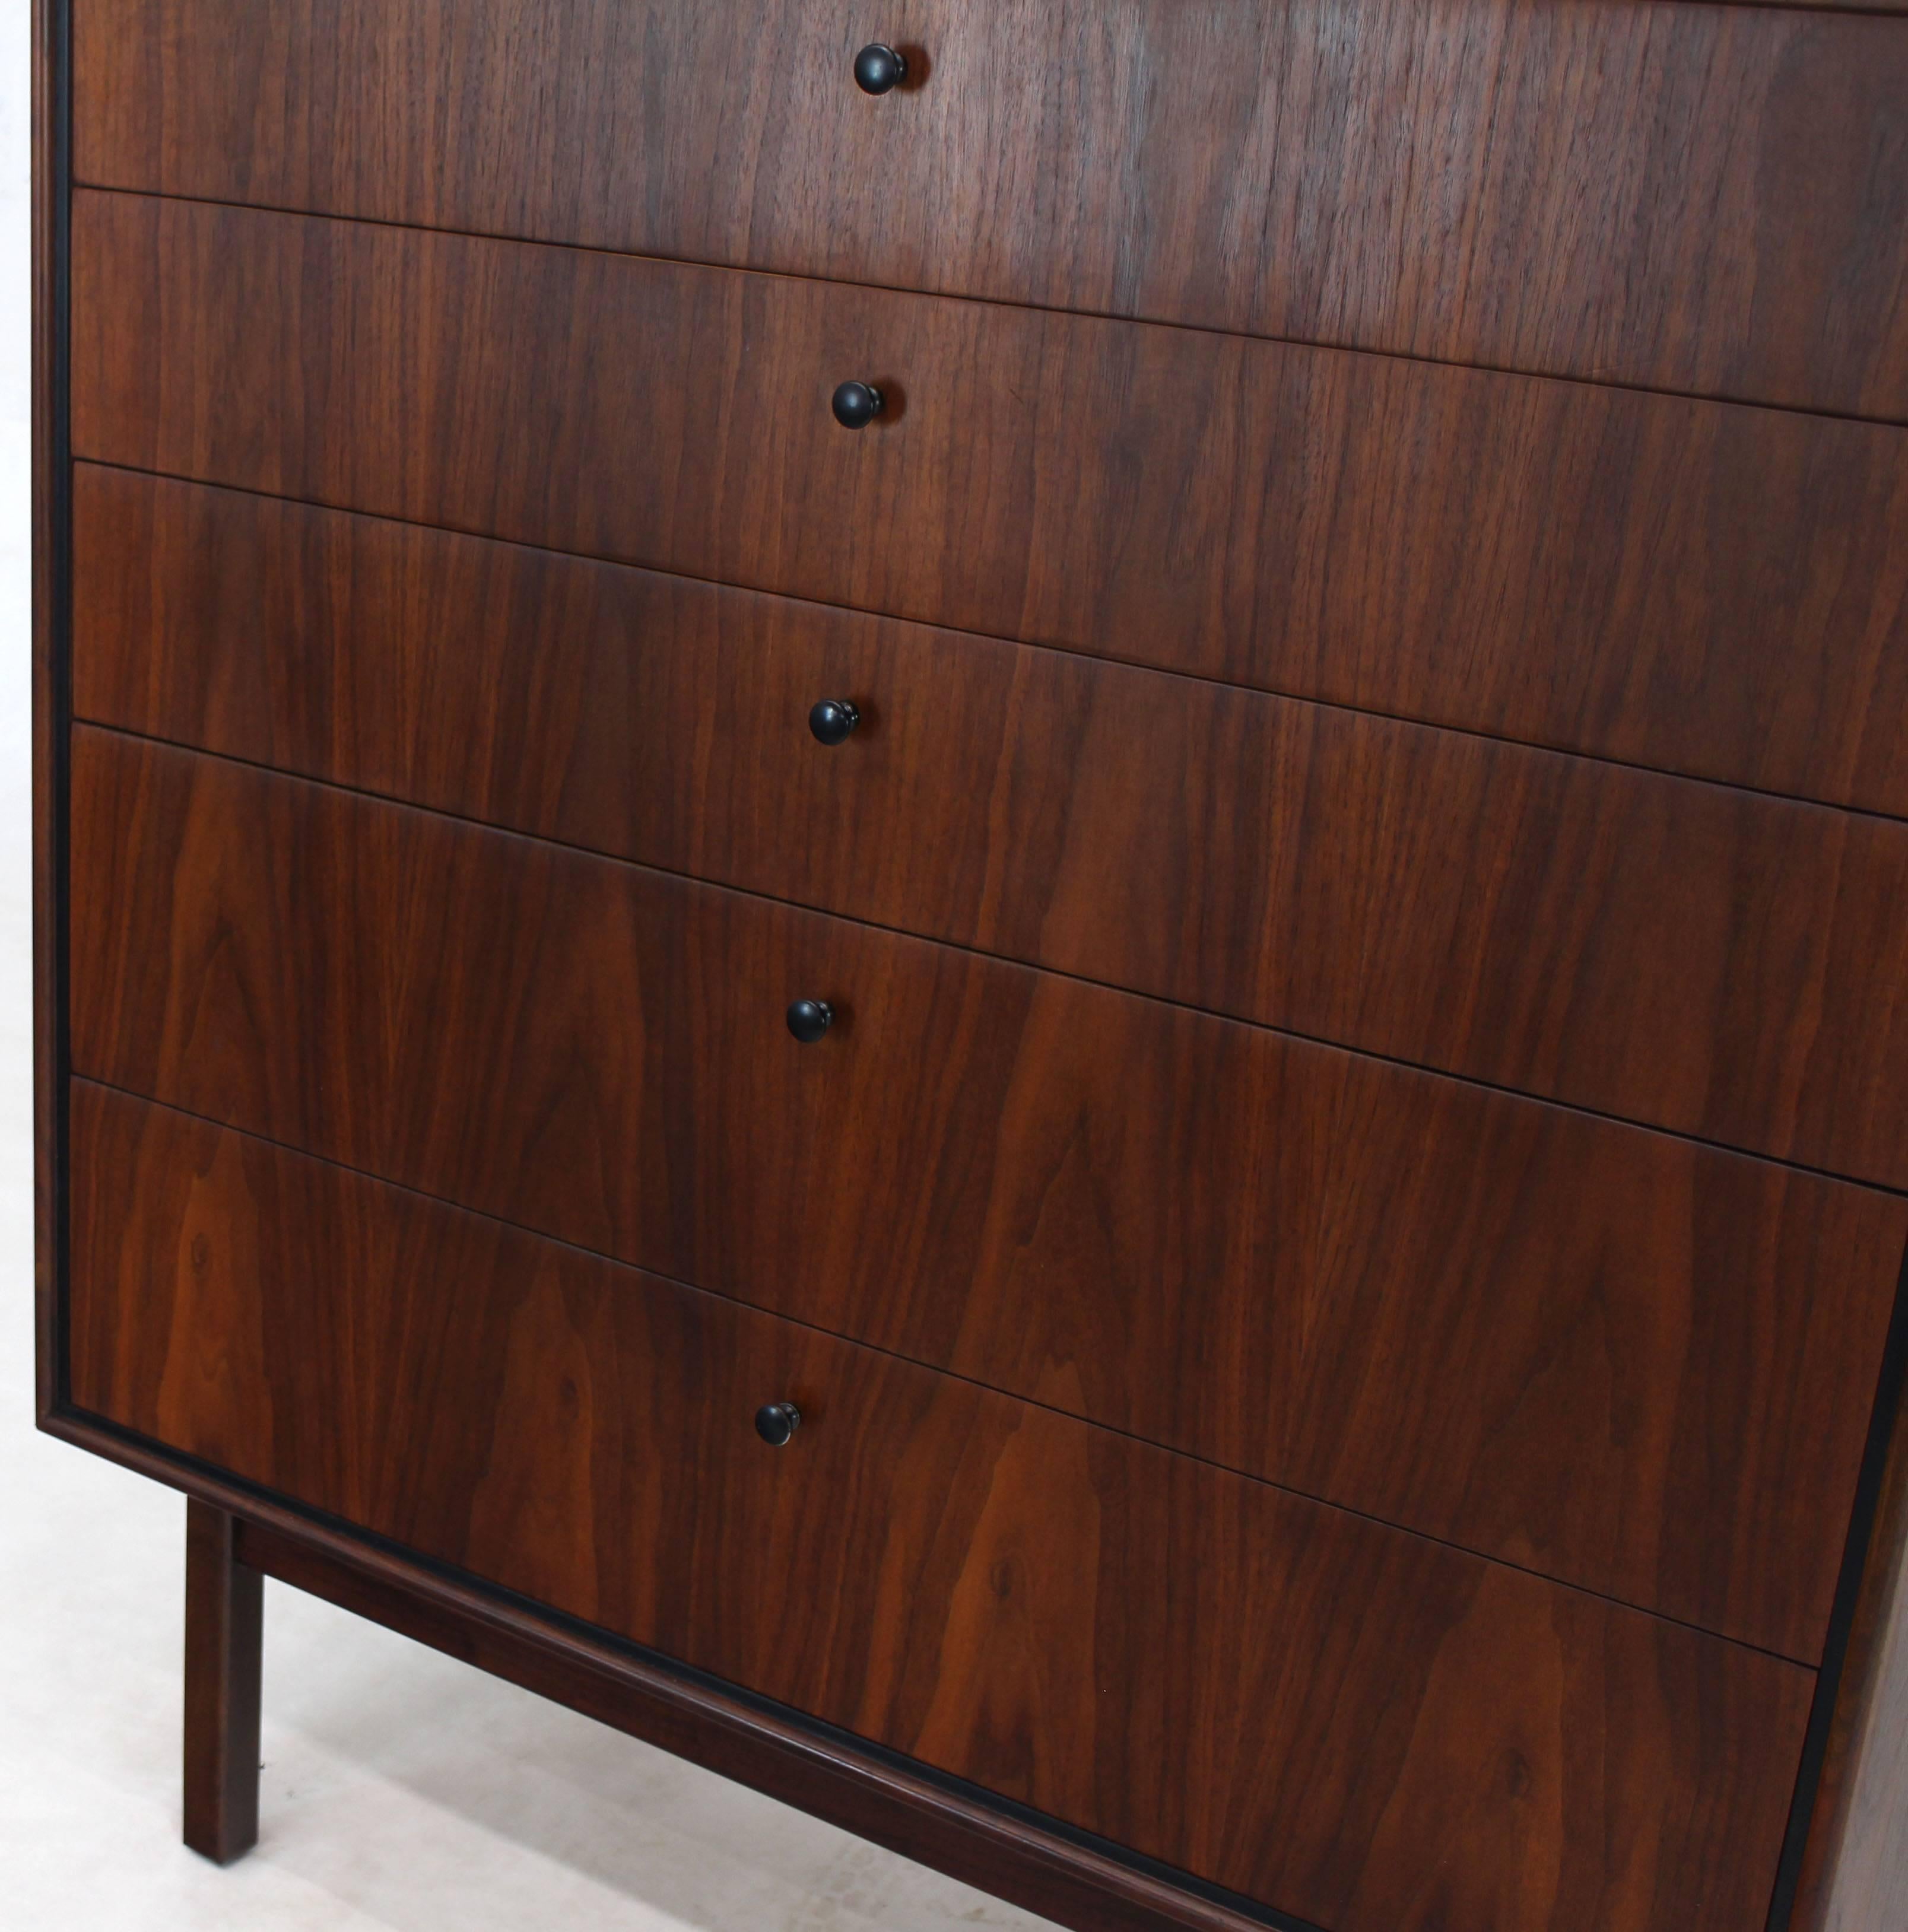 Bookmached Wood Grain Oiled Walnut 6 Drawers Tall High Chest Dresser  2